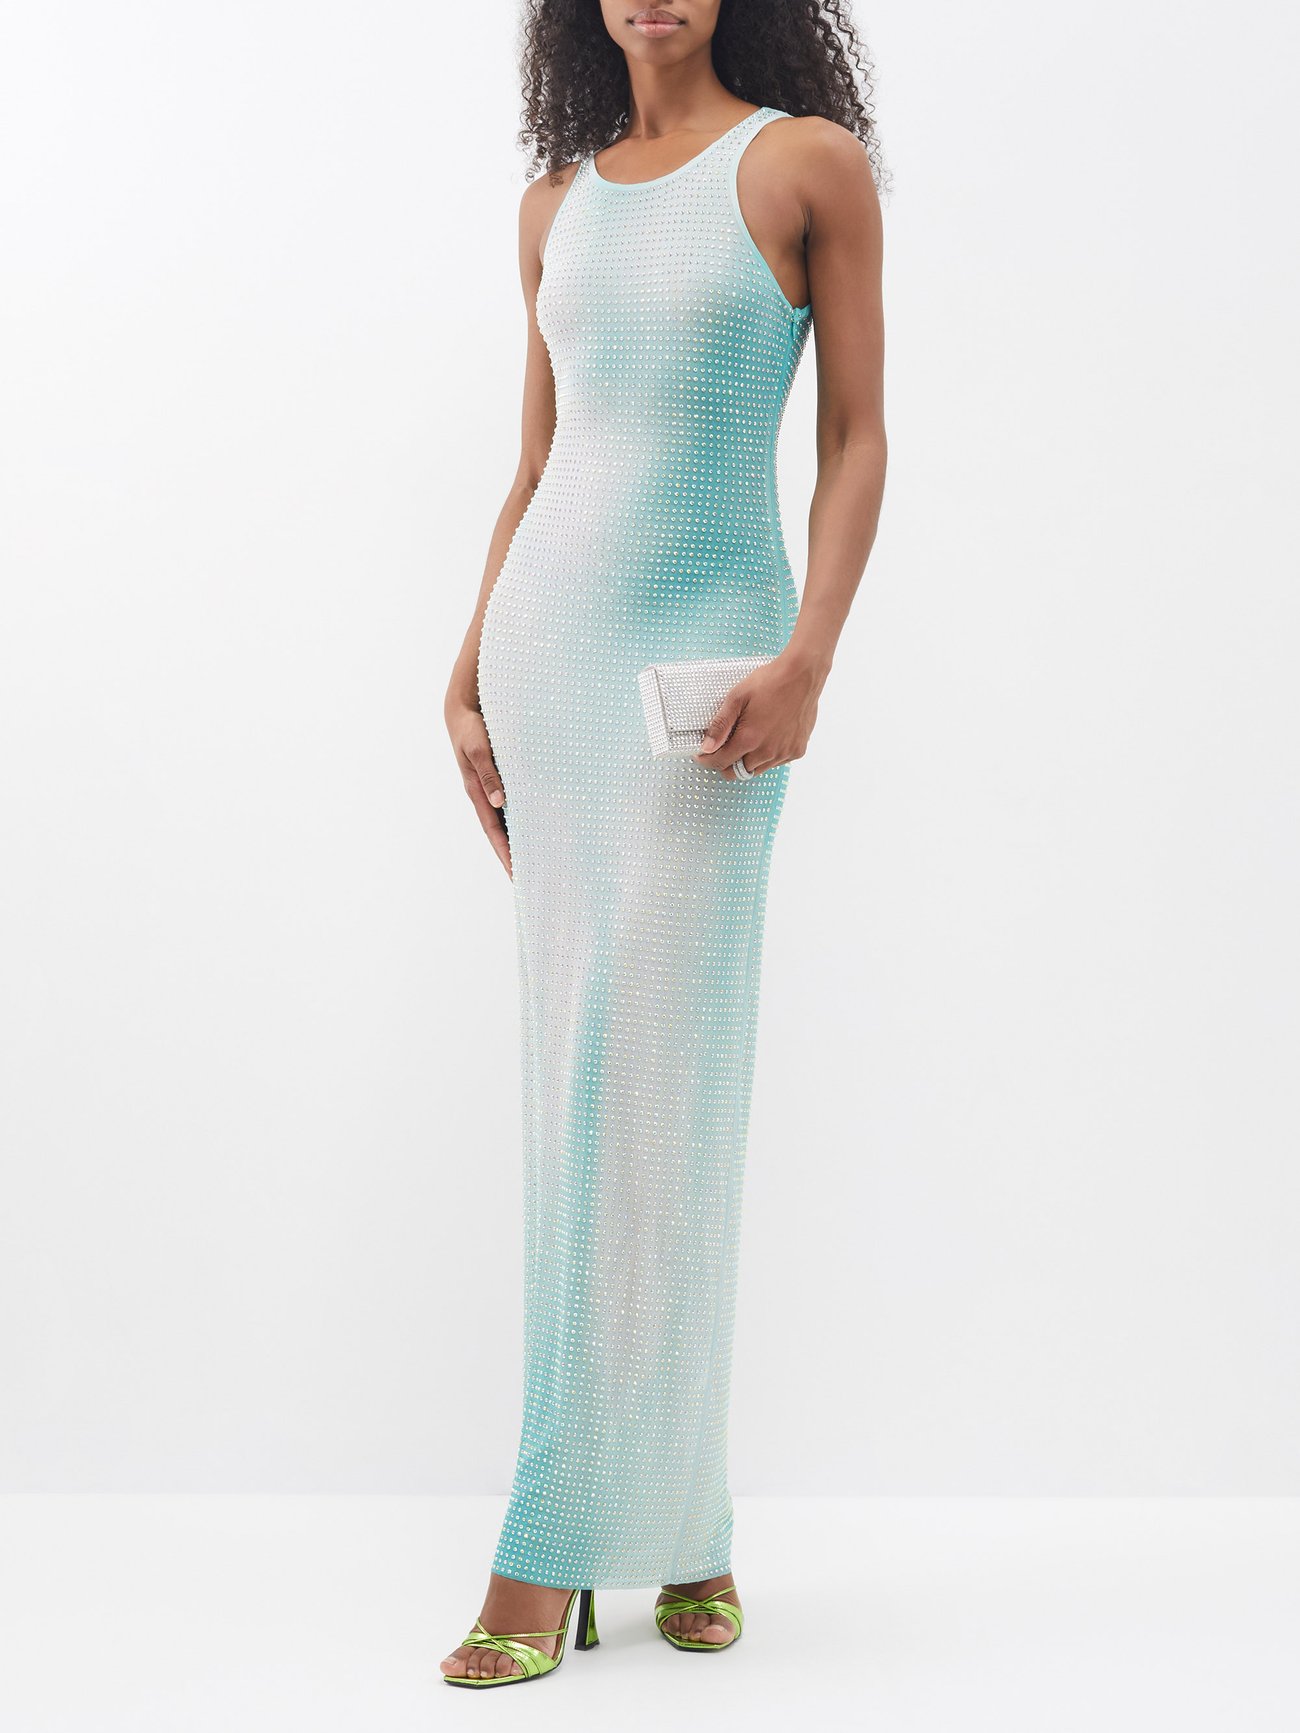 Han Chong muses on high summer for Pre-AW23 evidenced by this shimmering green maxi dress, made from gradient mesh faceted with hundreds of crystals.